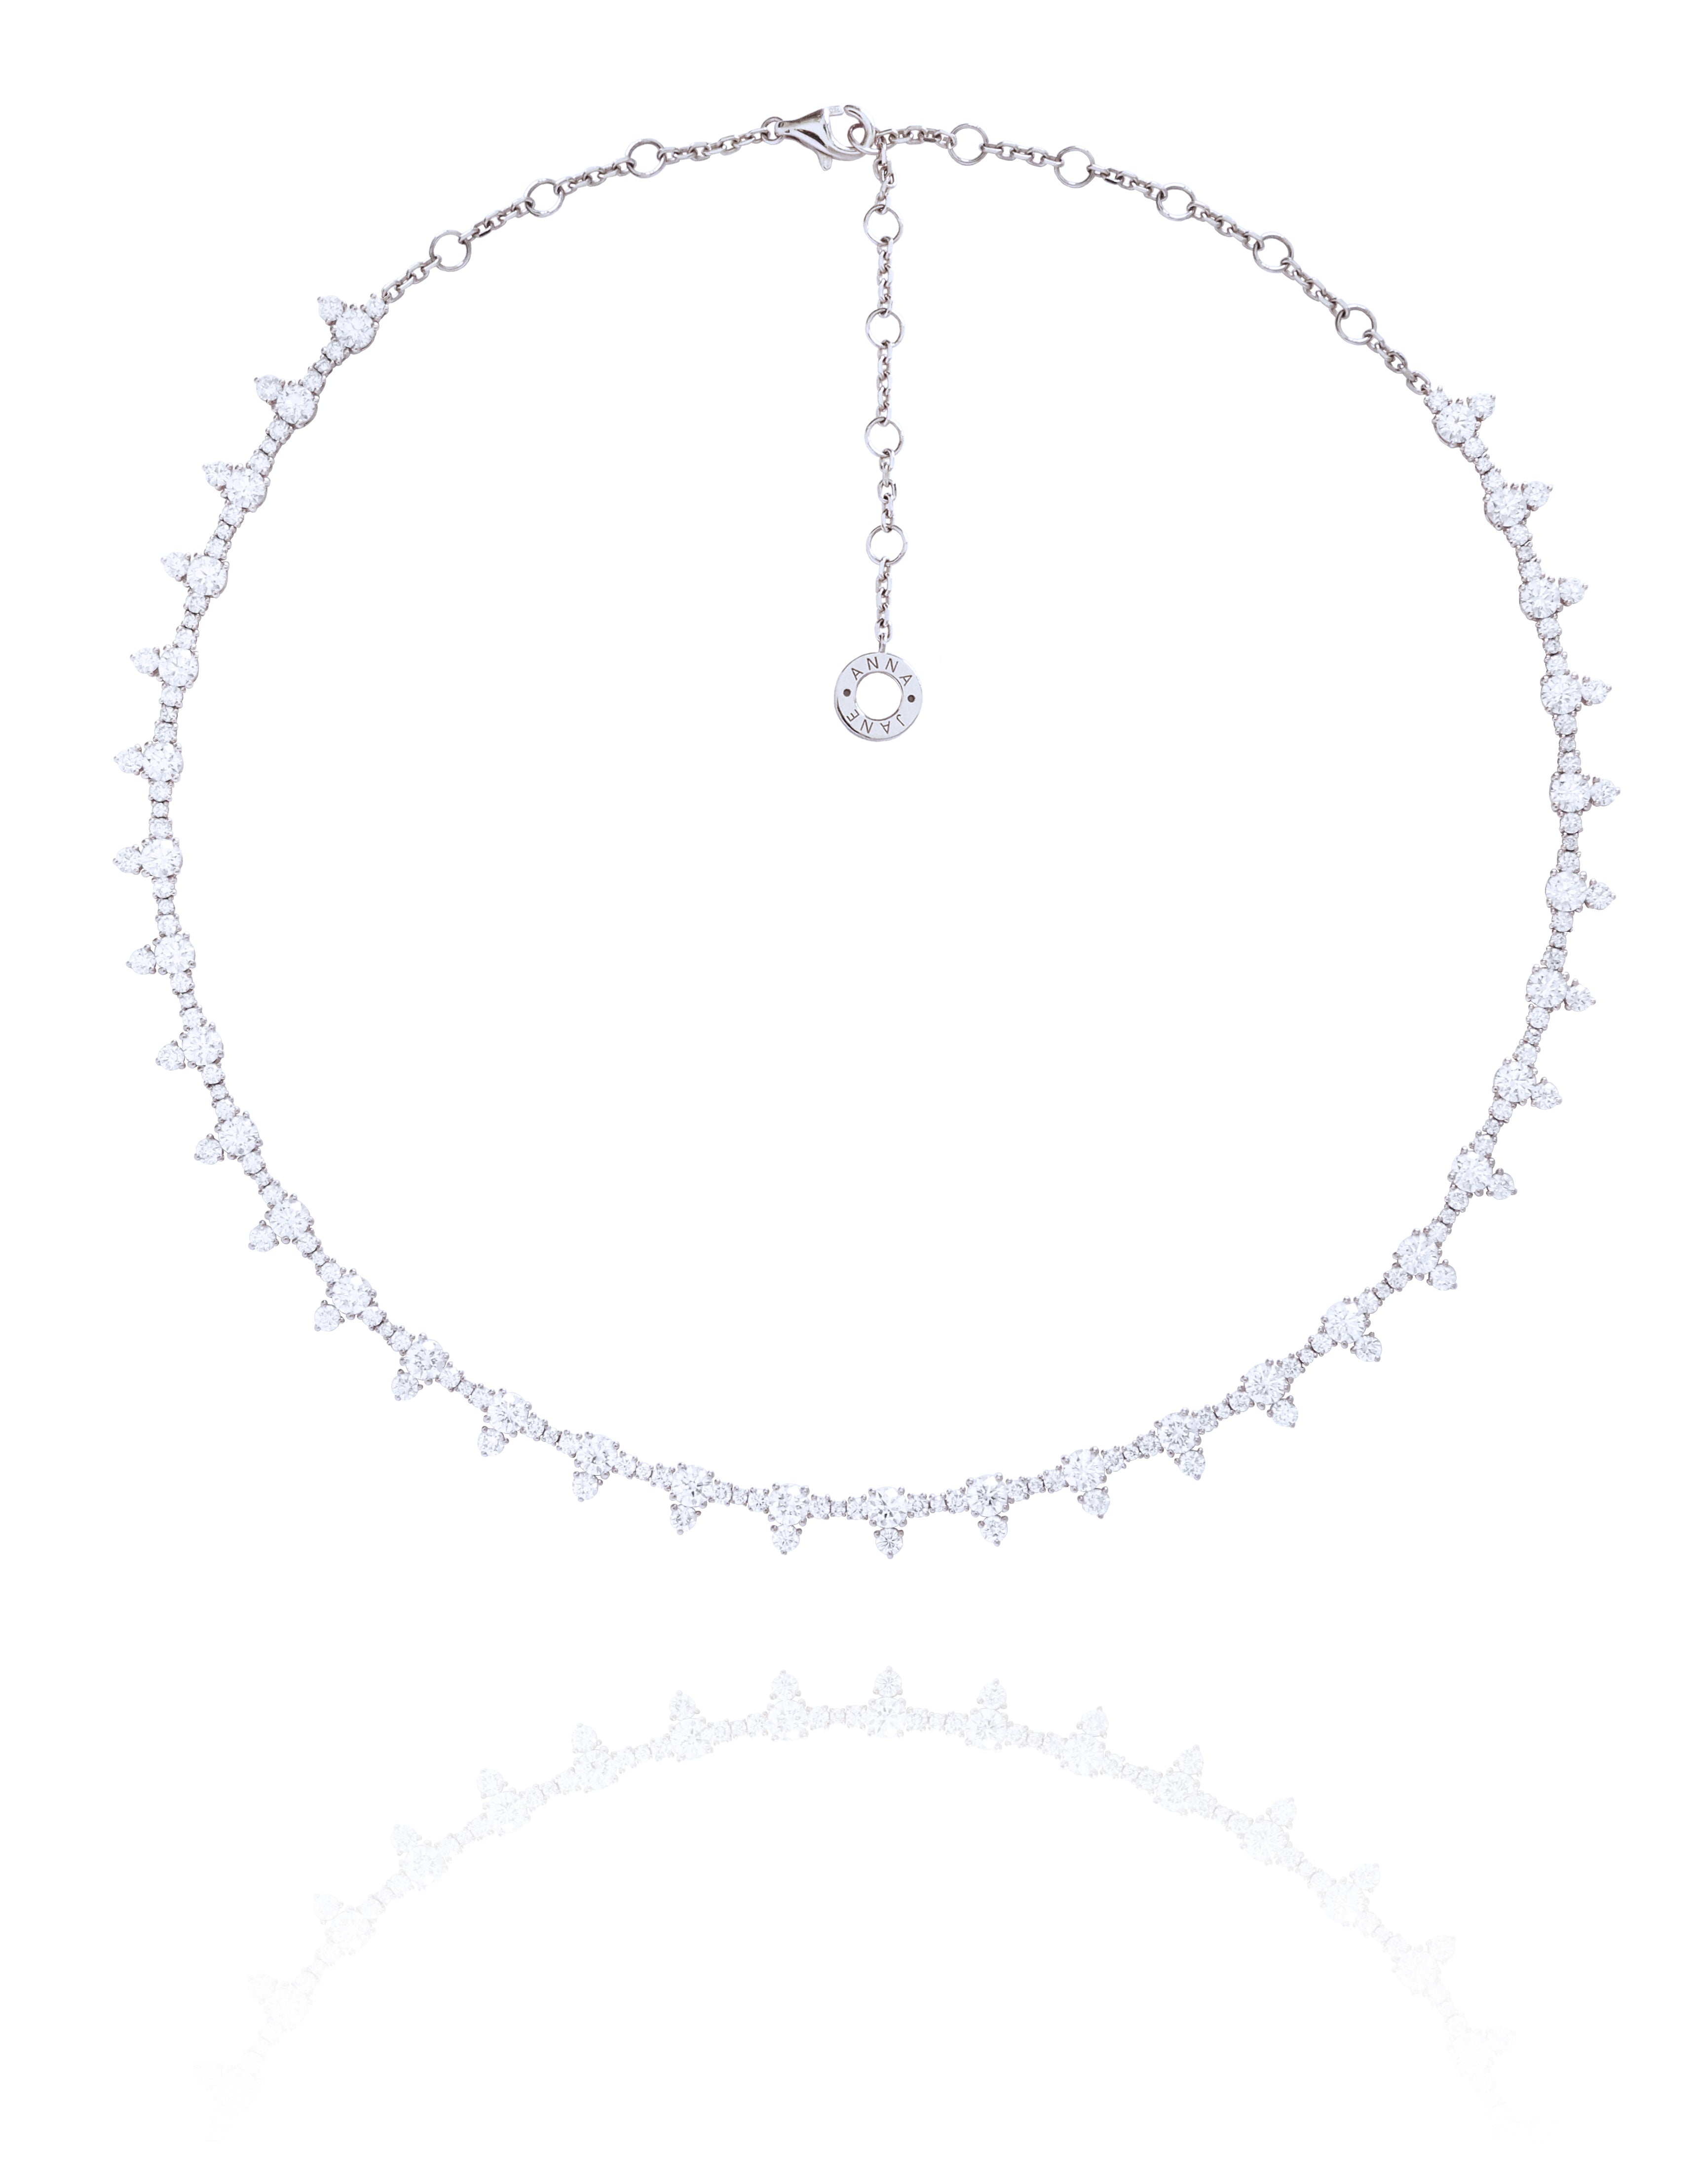 Adaline Diamond Necklace in Rose| Yellow | White Gold